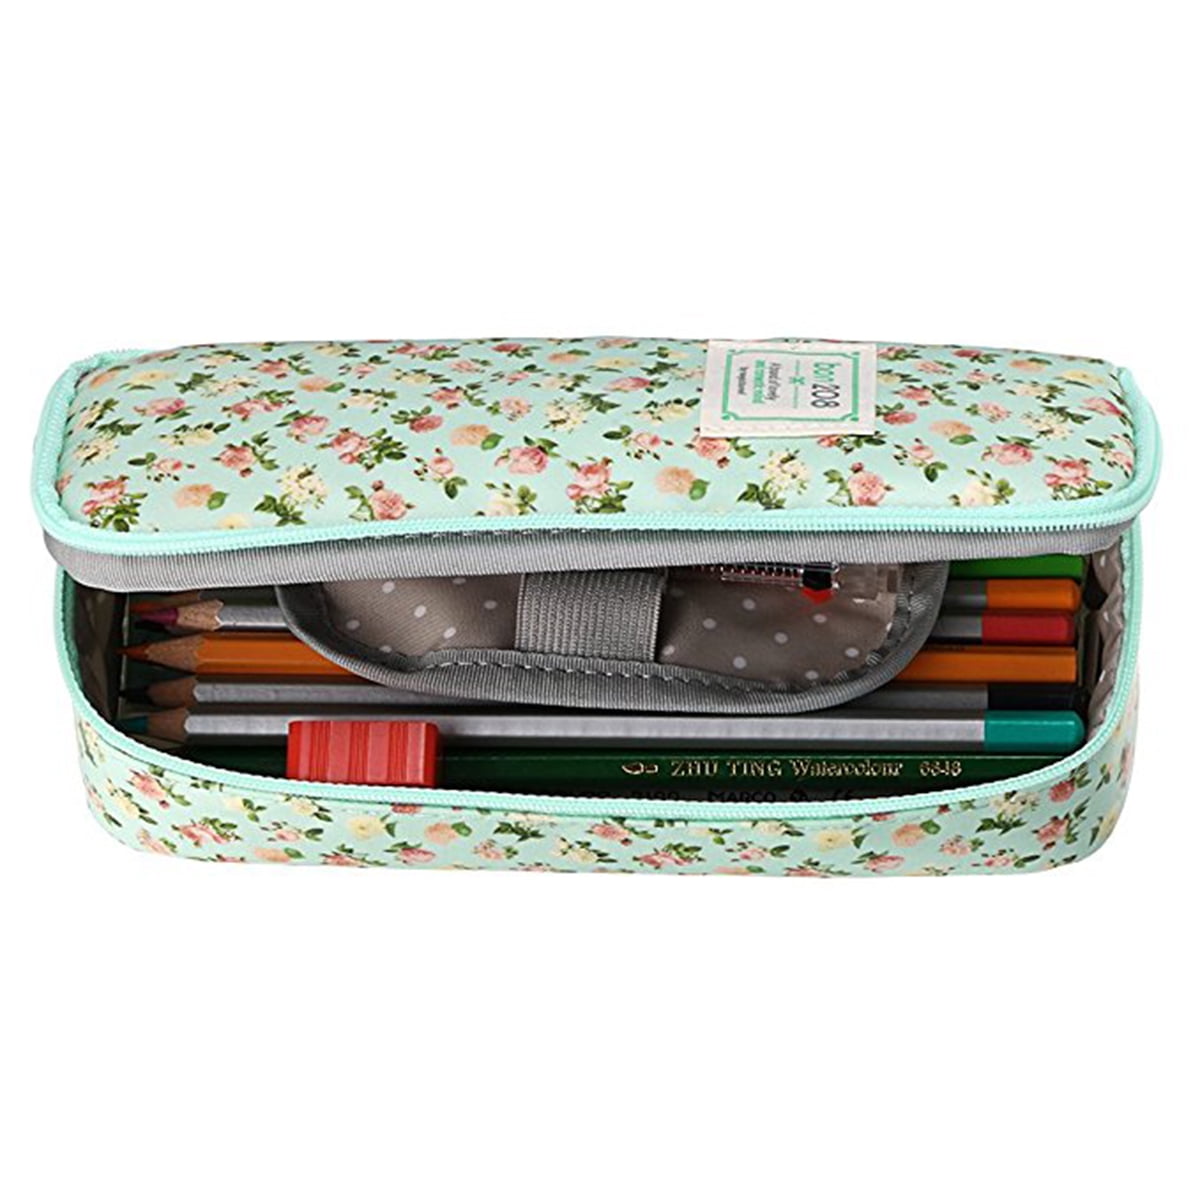 Empire Floral Pencil Case with Compartments -High Capacity Double Layers Pencil Pouch Stationery Organizer Multifunction Cosmetic Makeup Bag, Holder